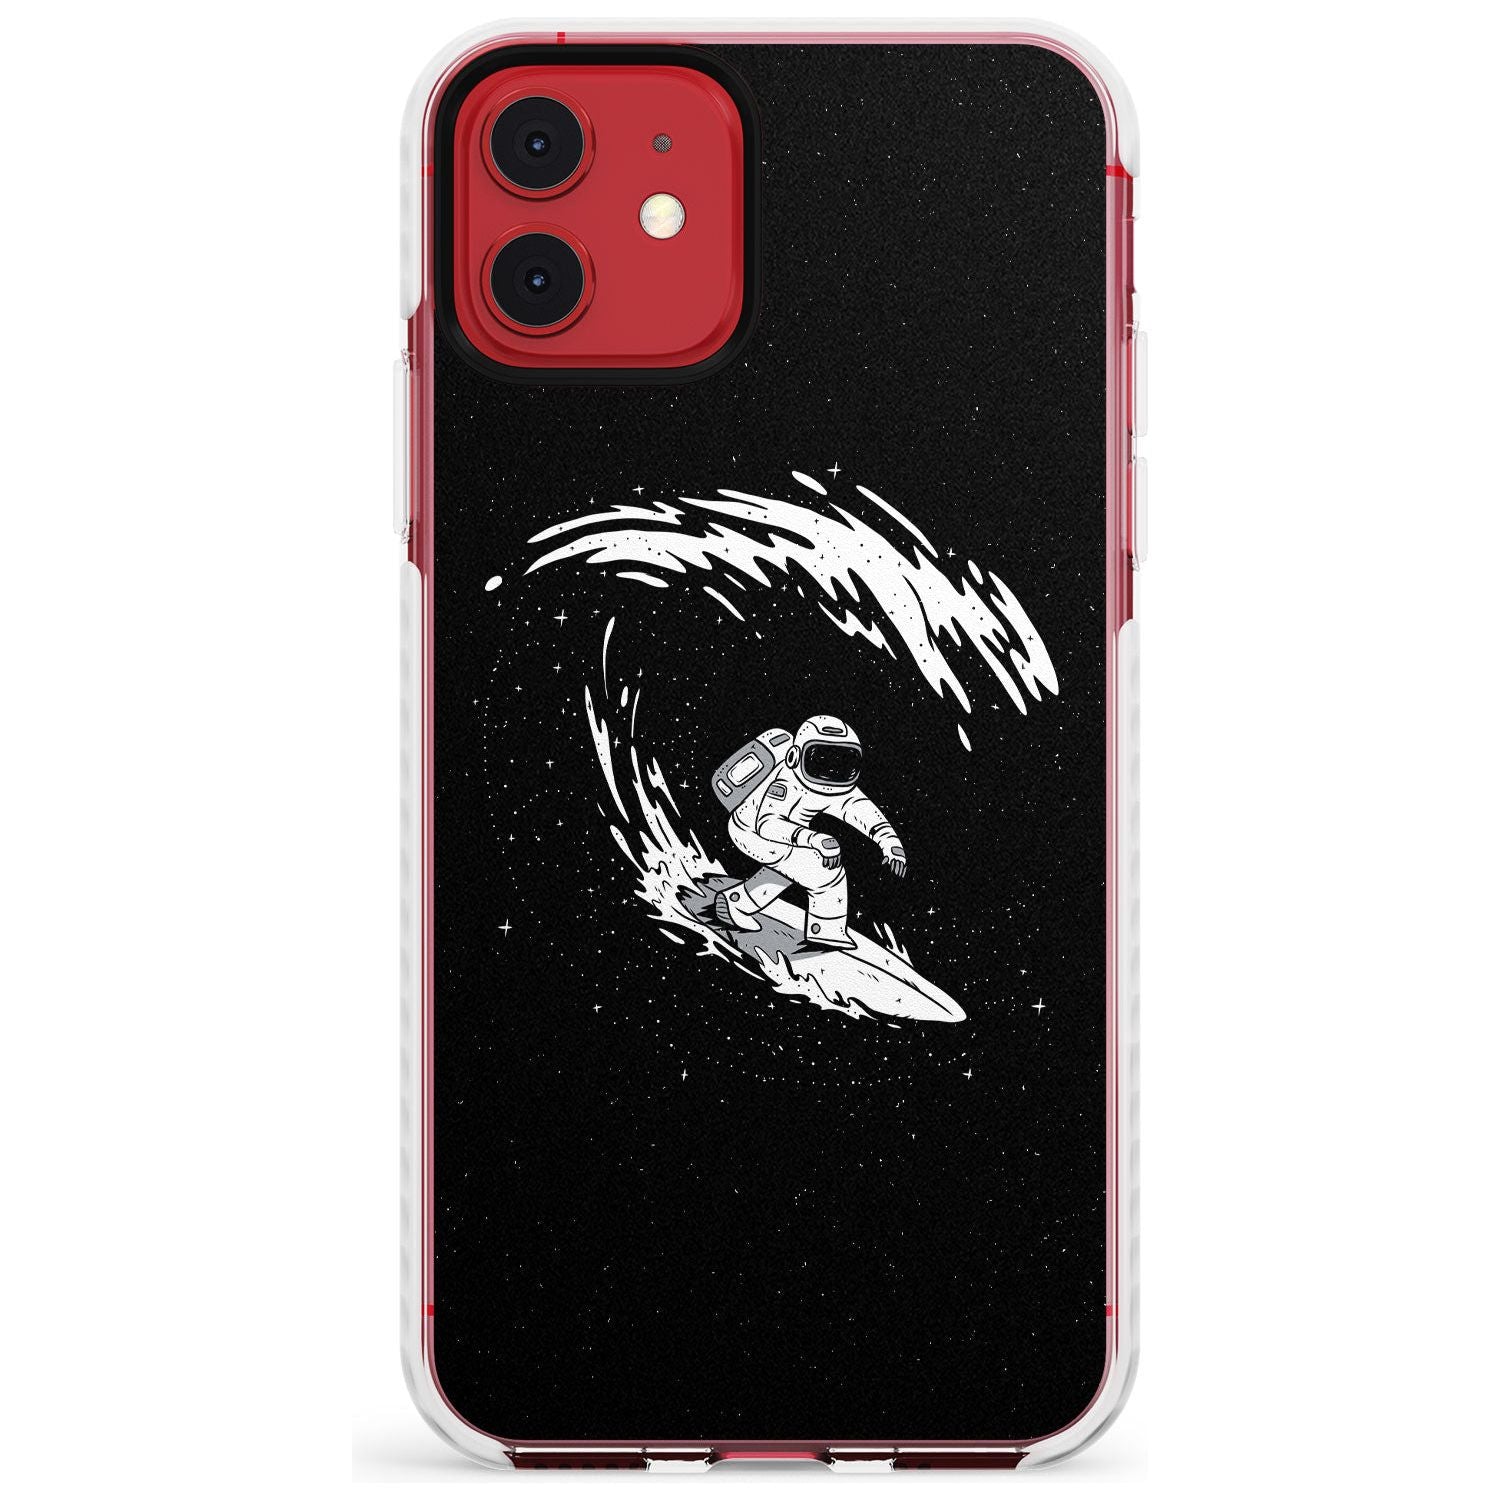 Surfing Astronaut Slim TPU Phone Case for iPhone 11